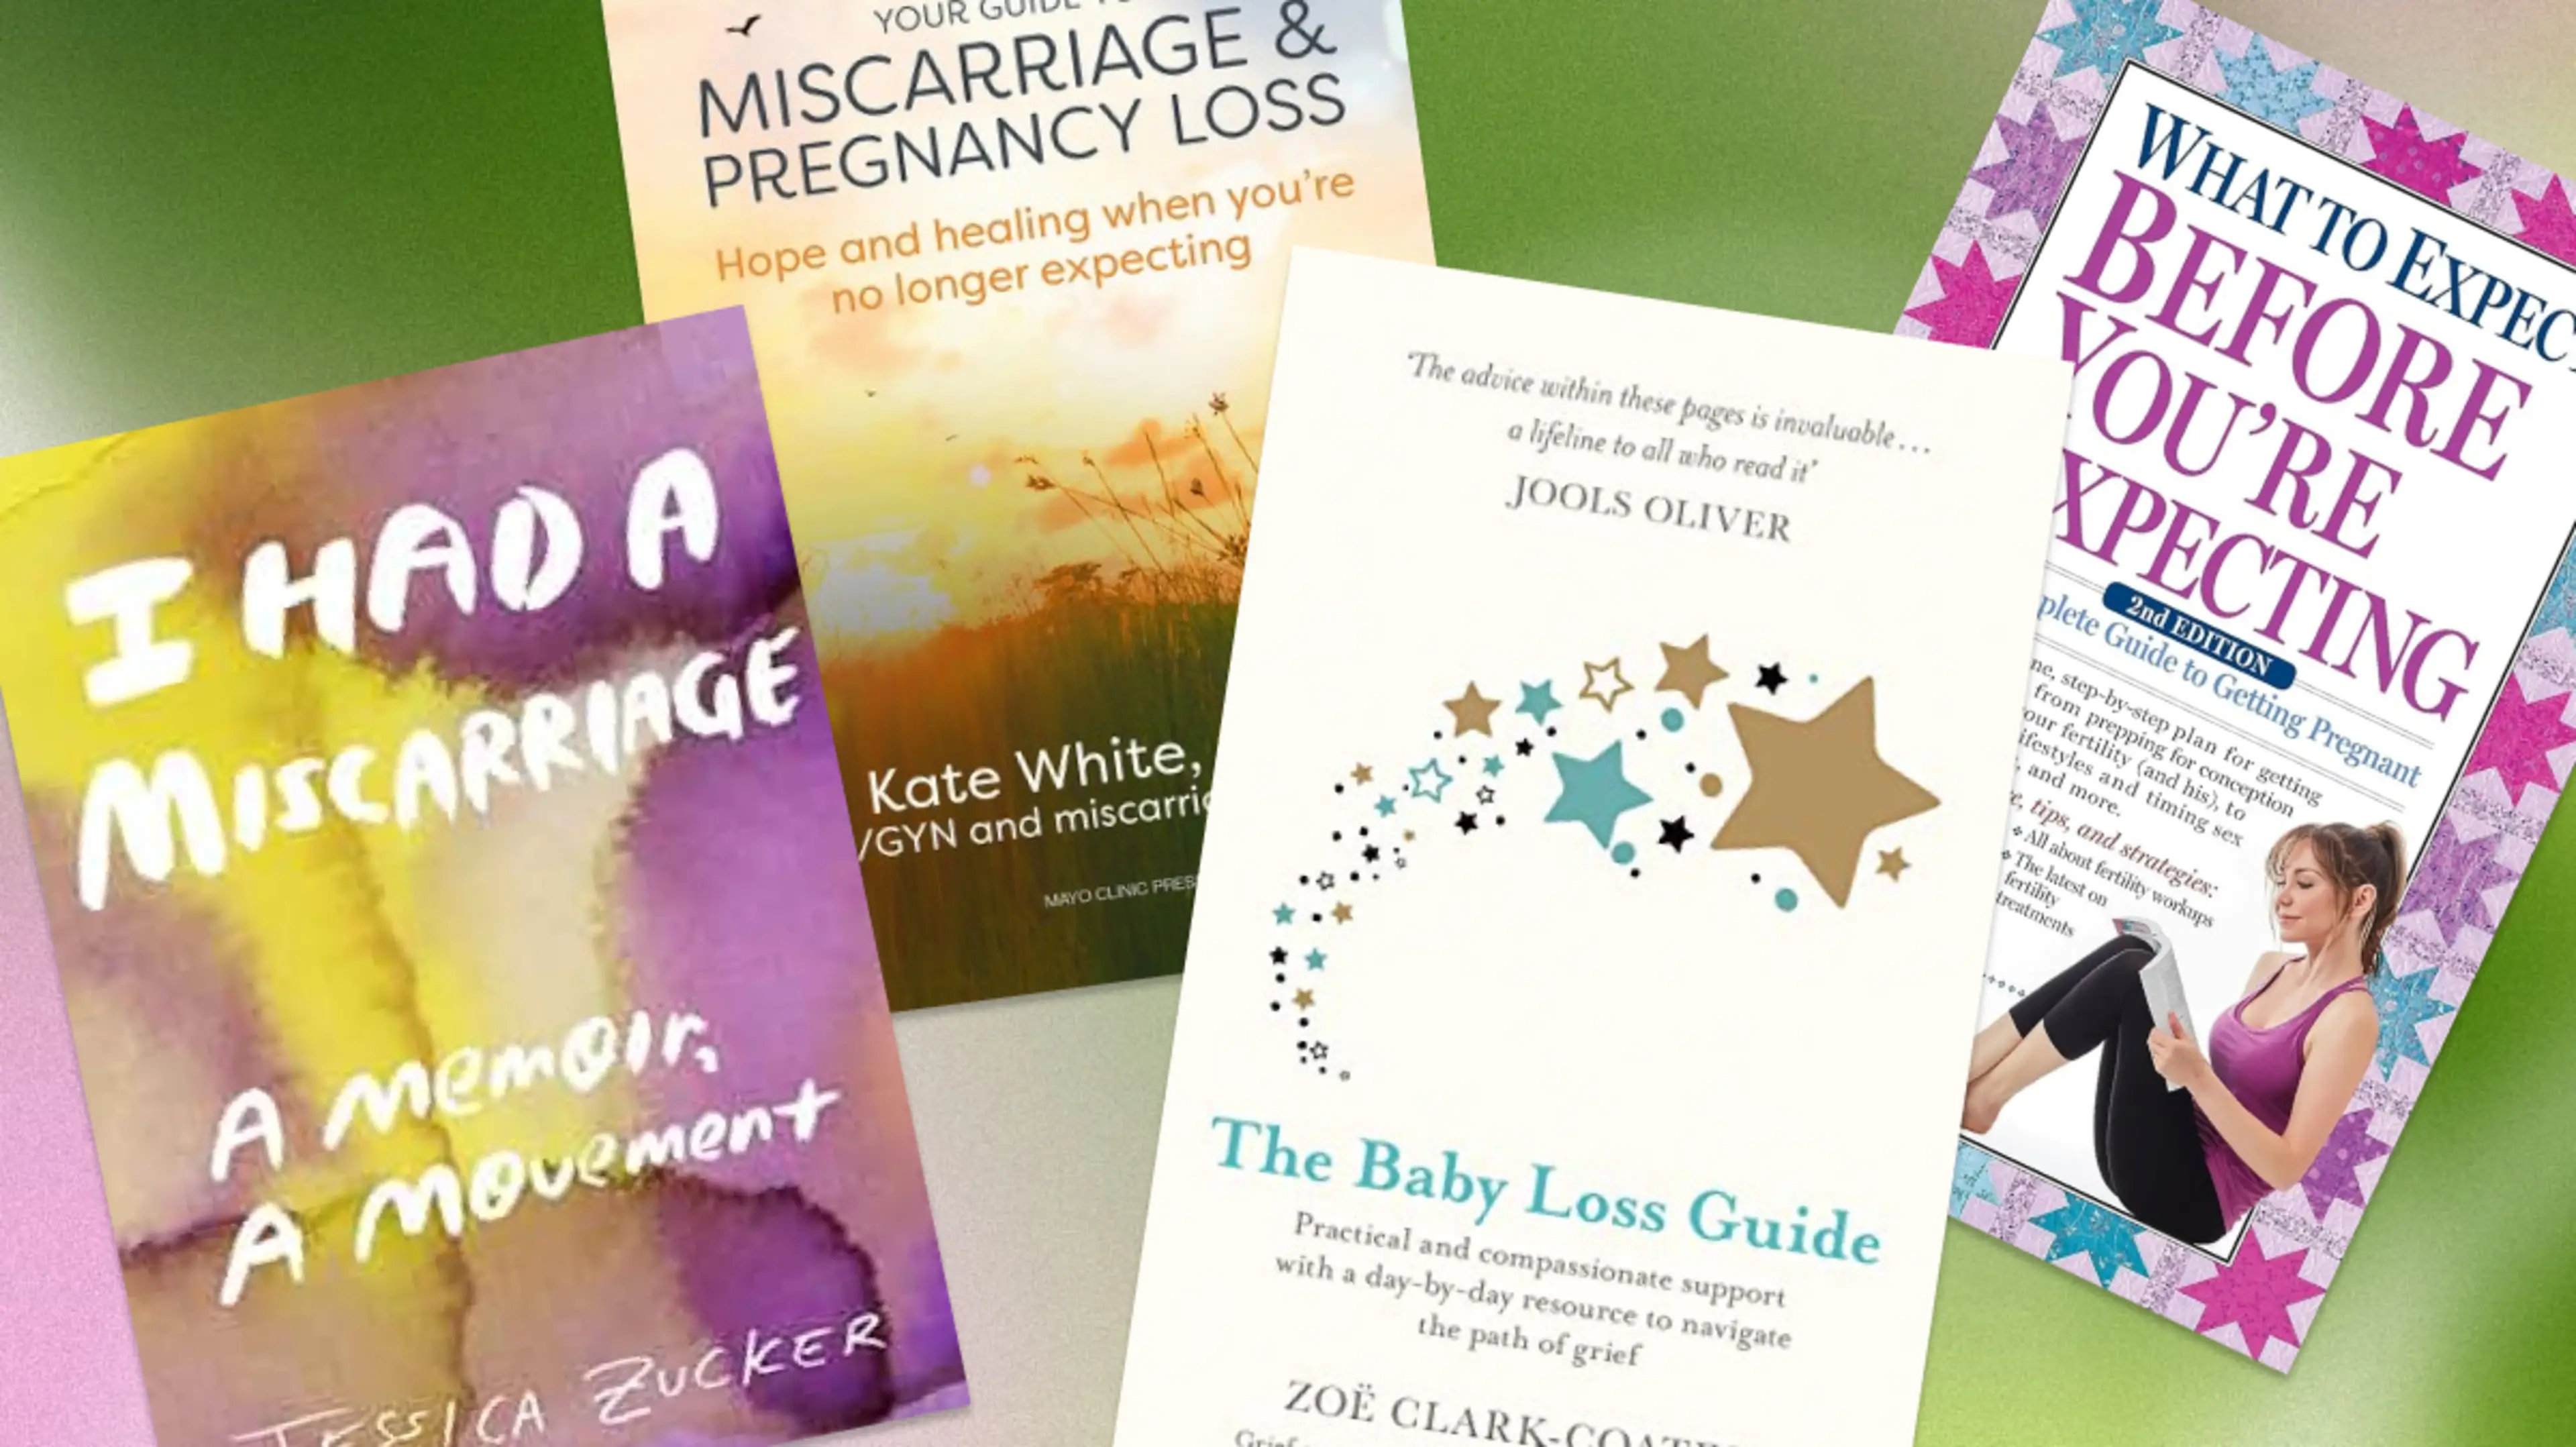 Image for article When I Had a Miscarriage, These 4 Books Got Me Through